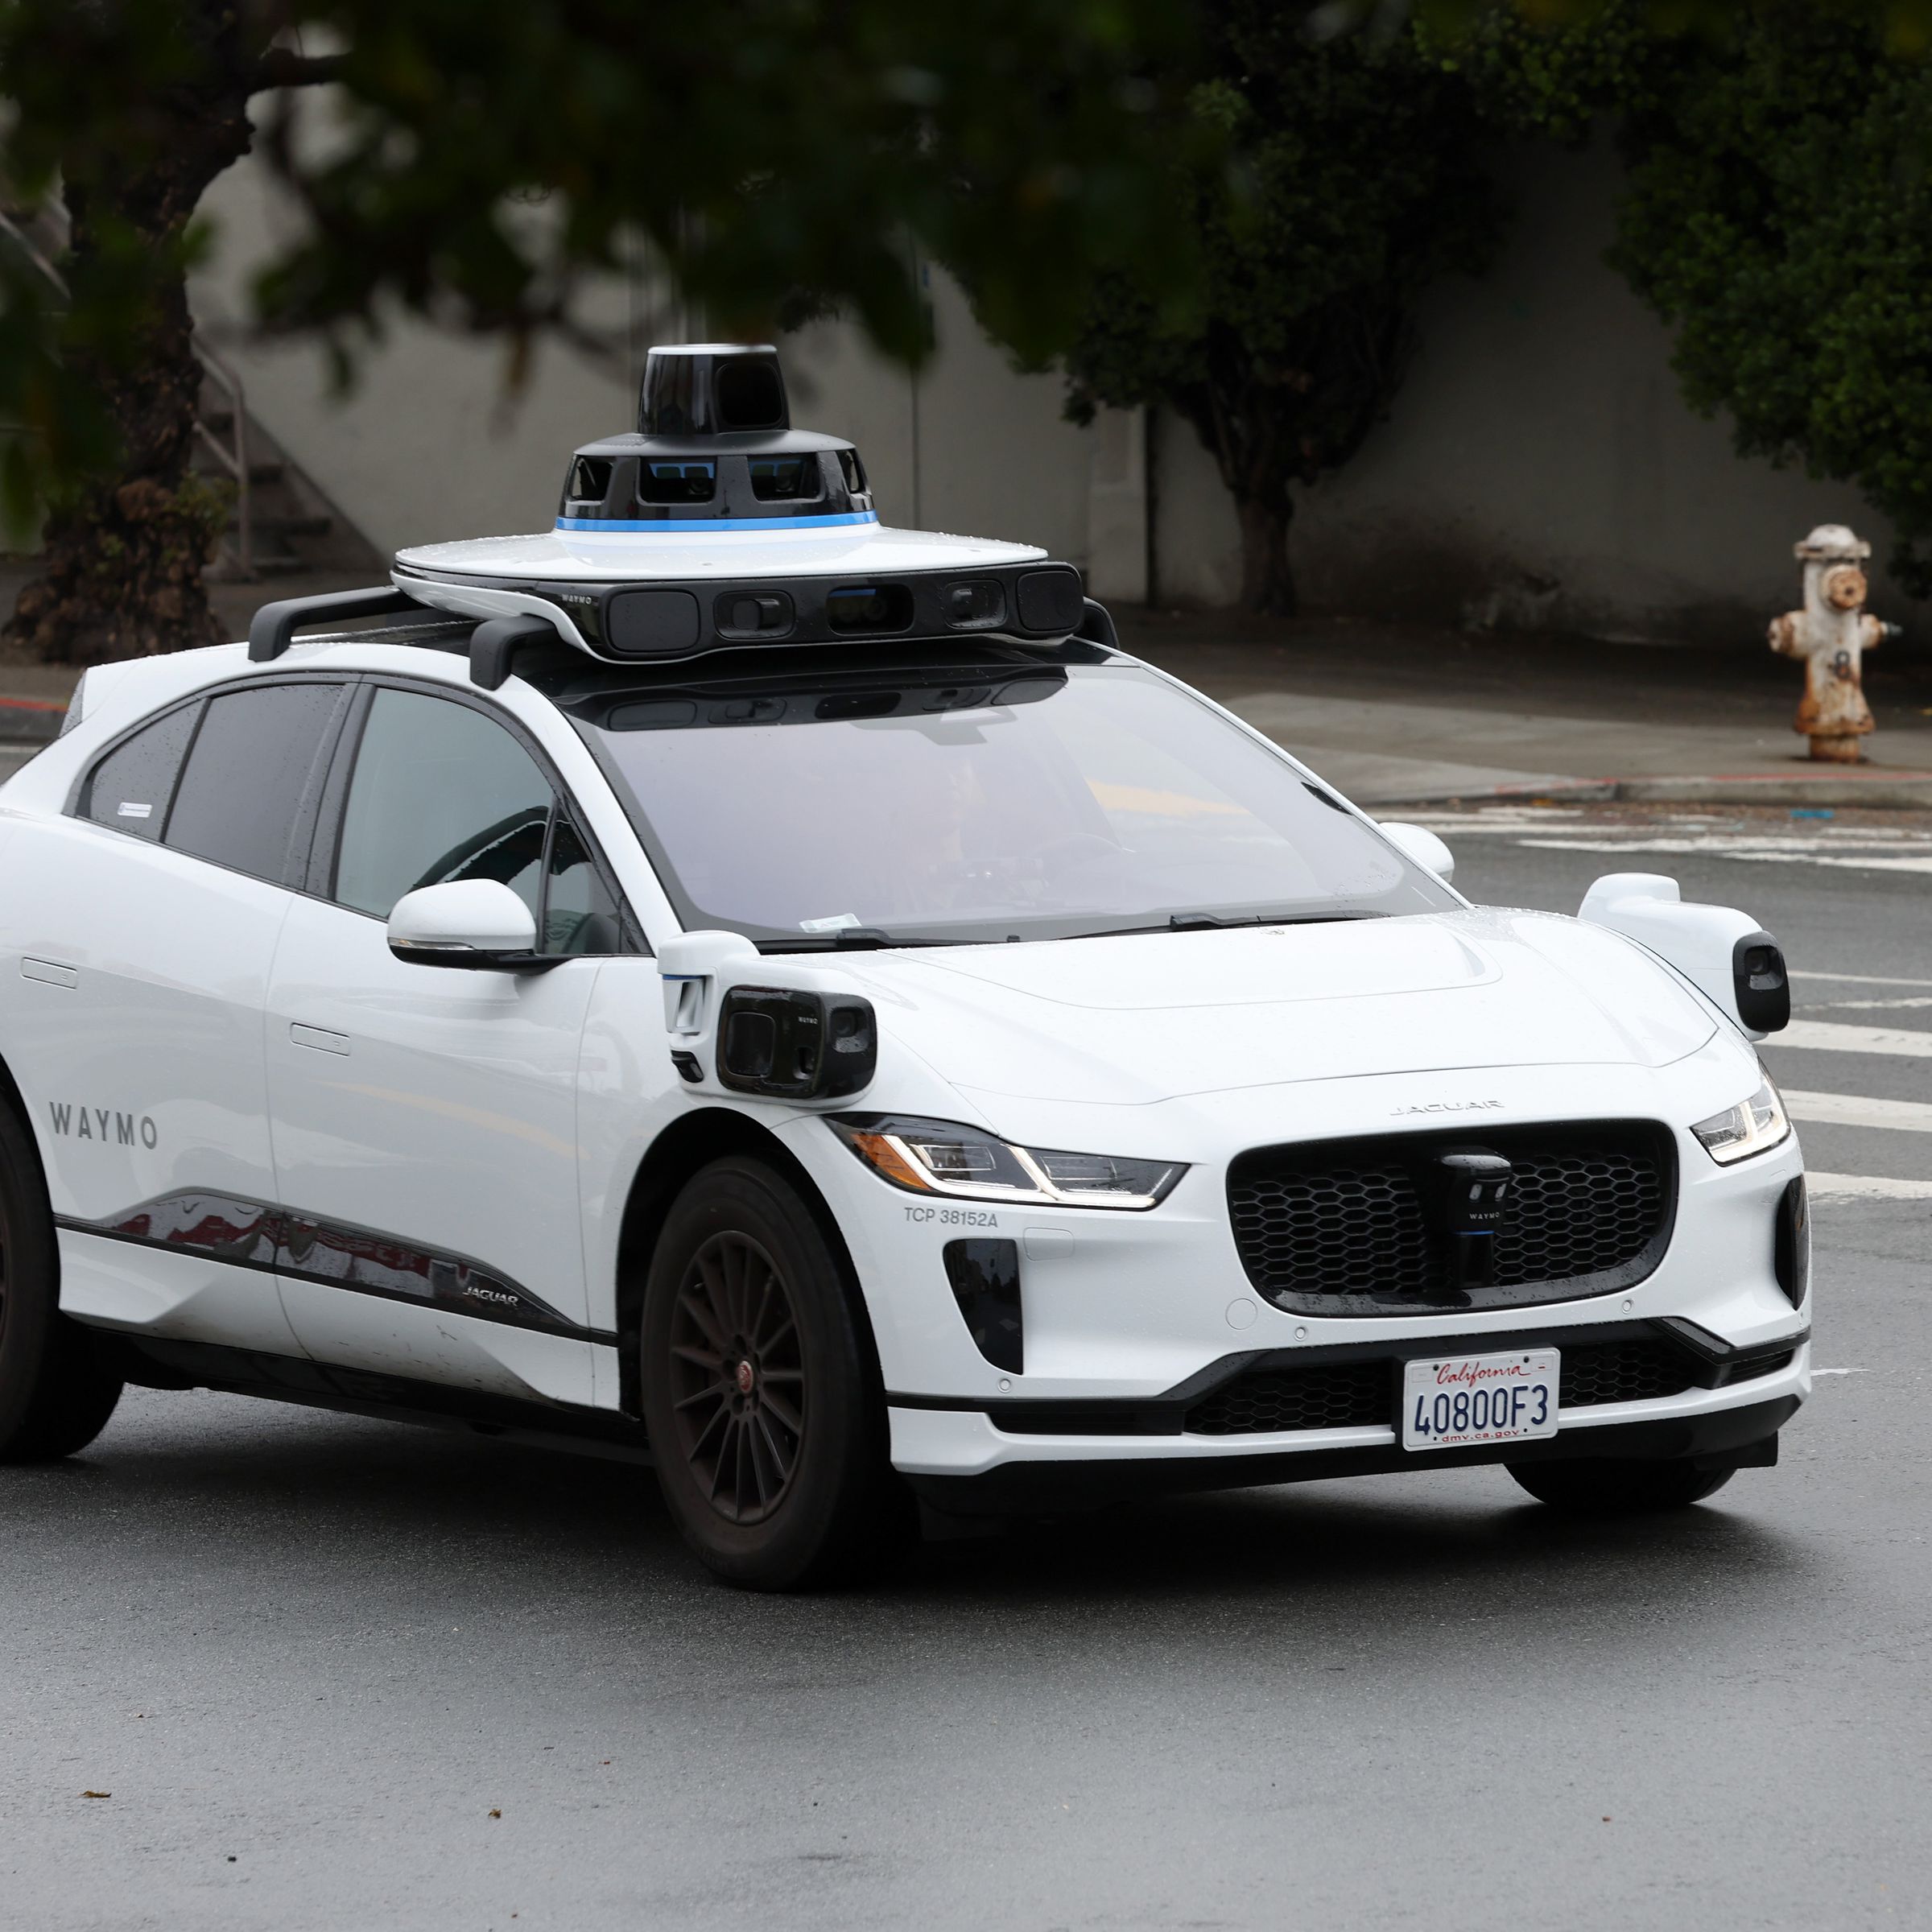 A white Waymo vehicle on the road